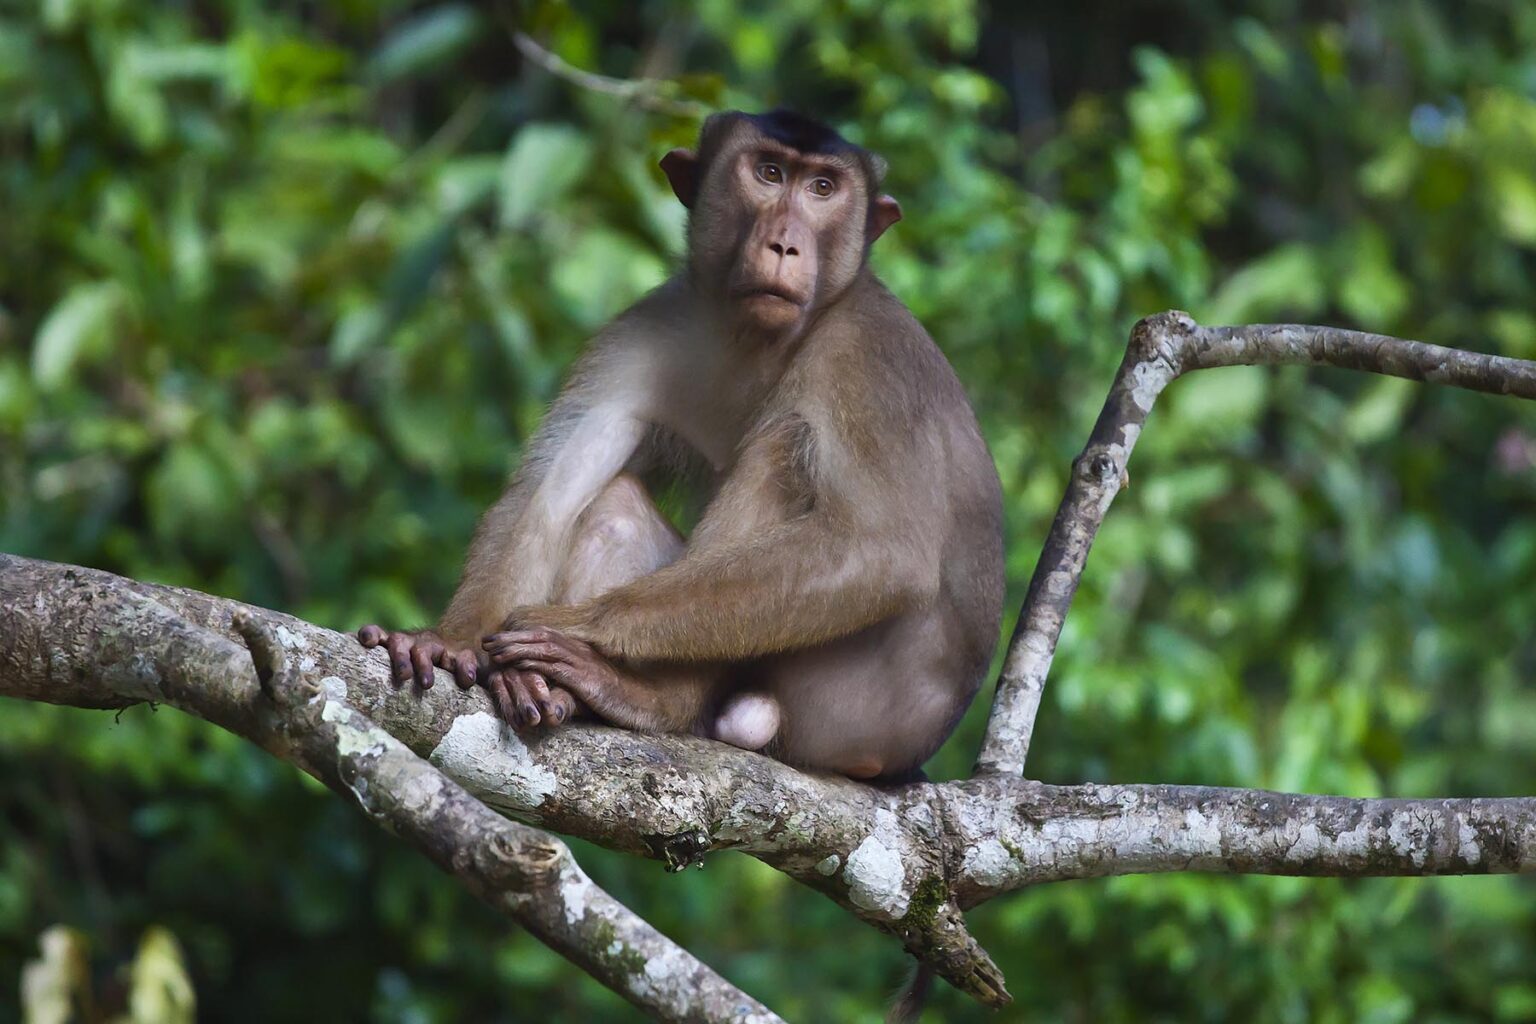 A male SHORT TAILED or STUMP TAILED MACAQUE (Macaca arctoices) sits on a branch in the KINABATANGAN RIVER WILDLIFE SANCTUARY - SABAH, BORNEO